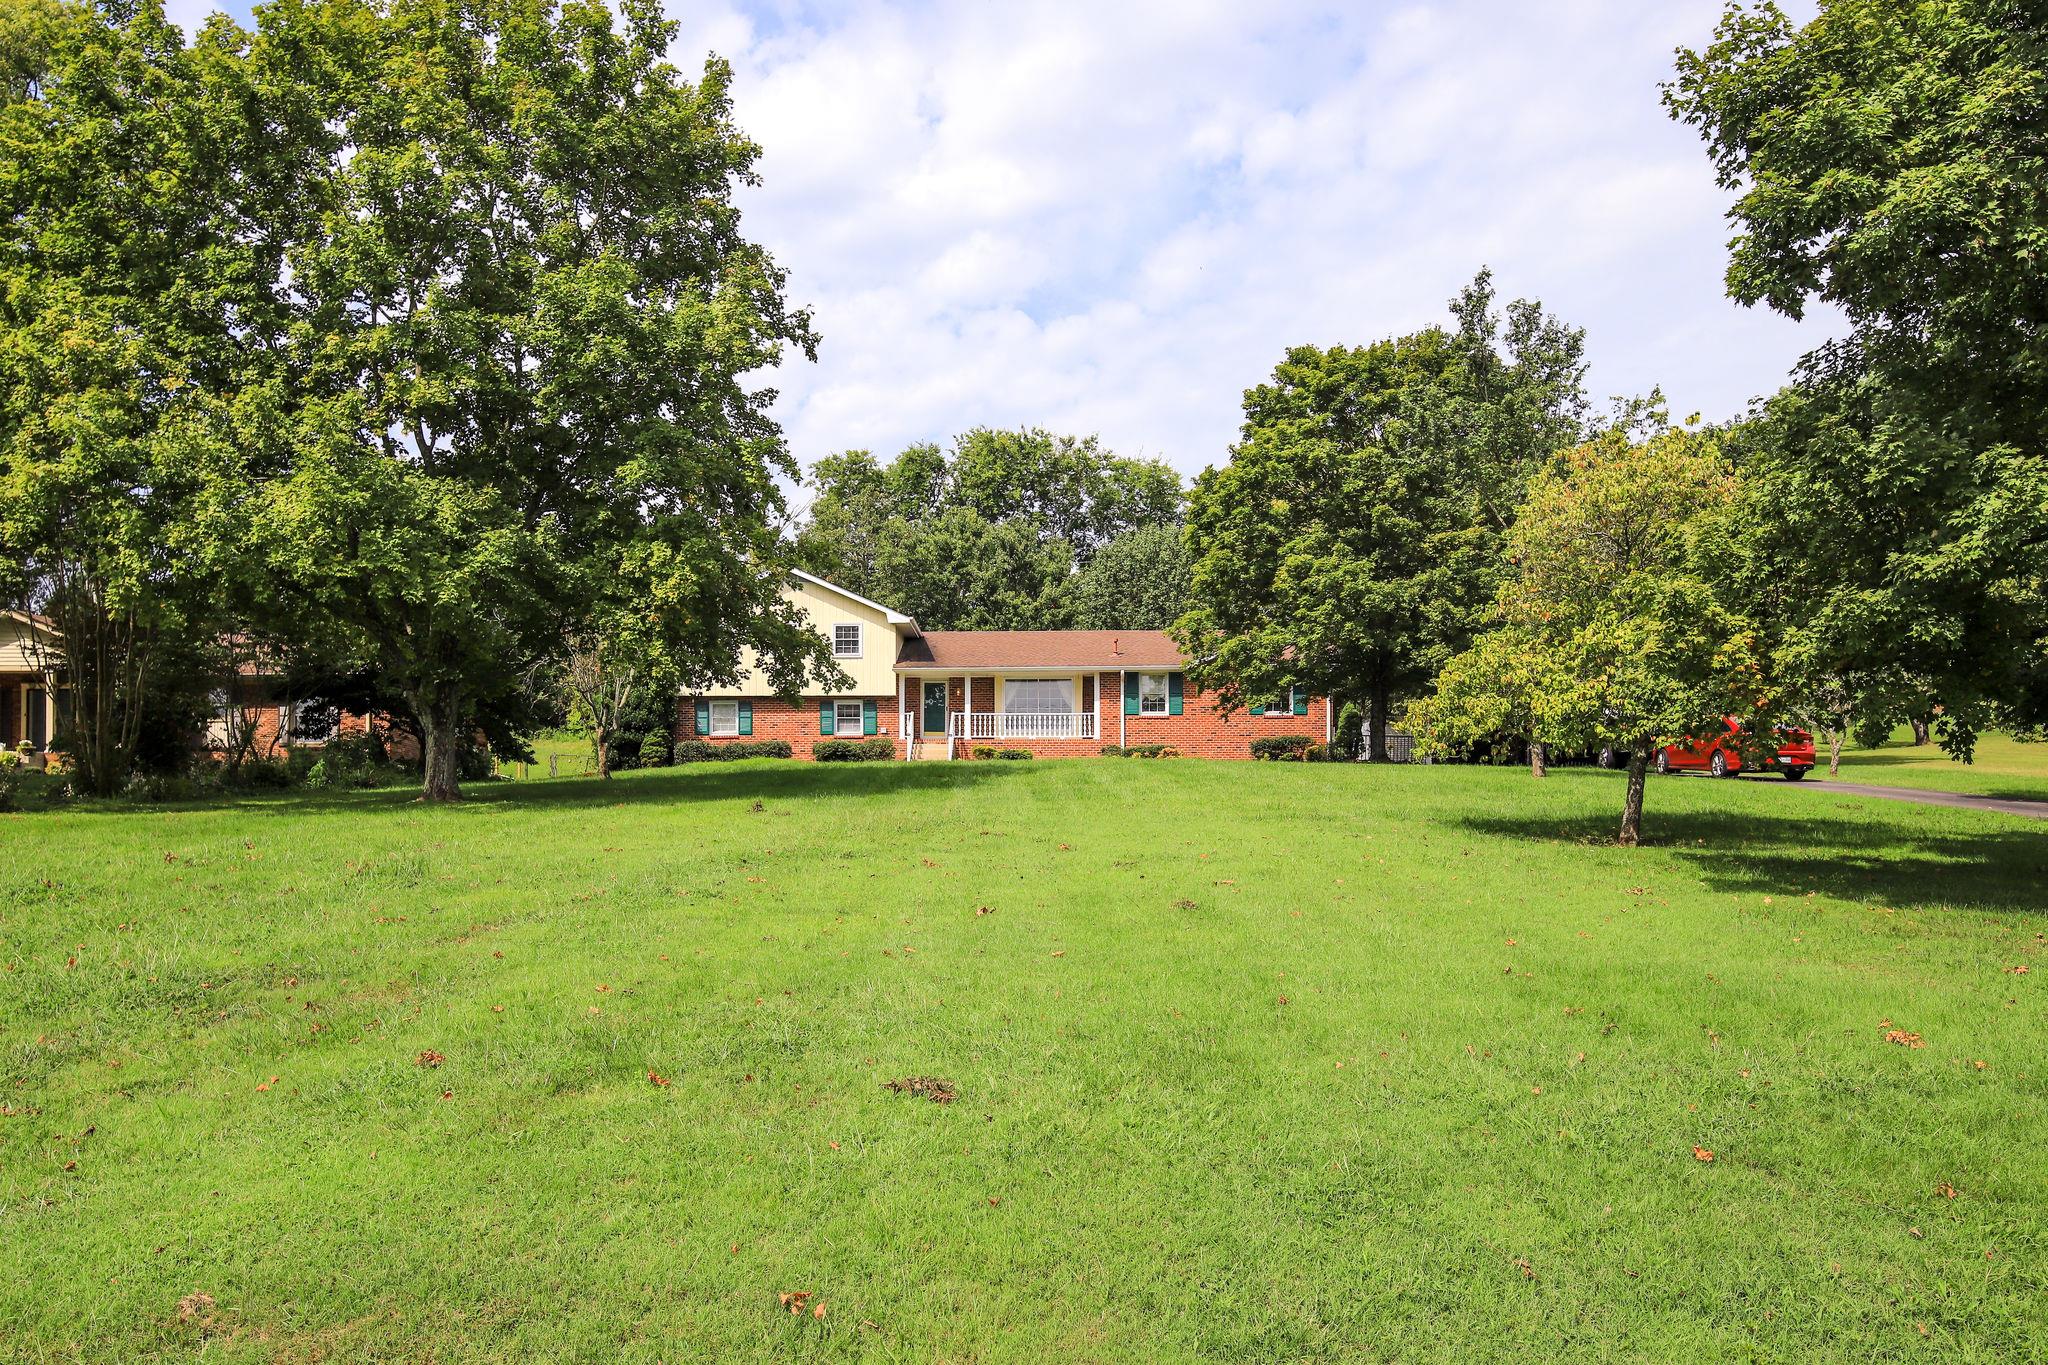 Amazing home on almost an ACRE lot!